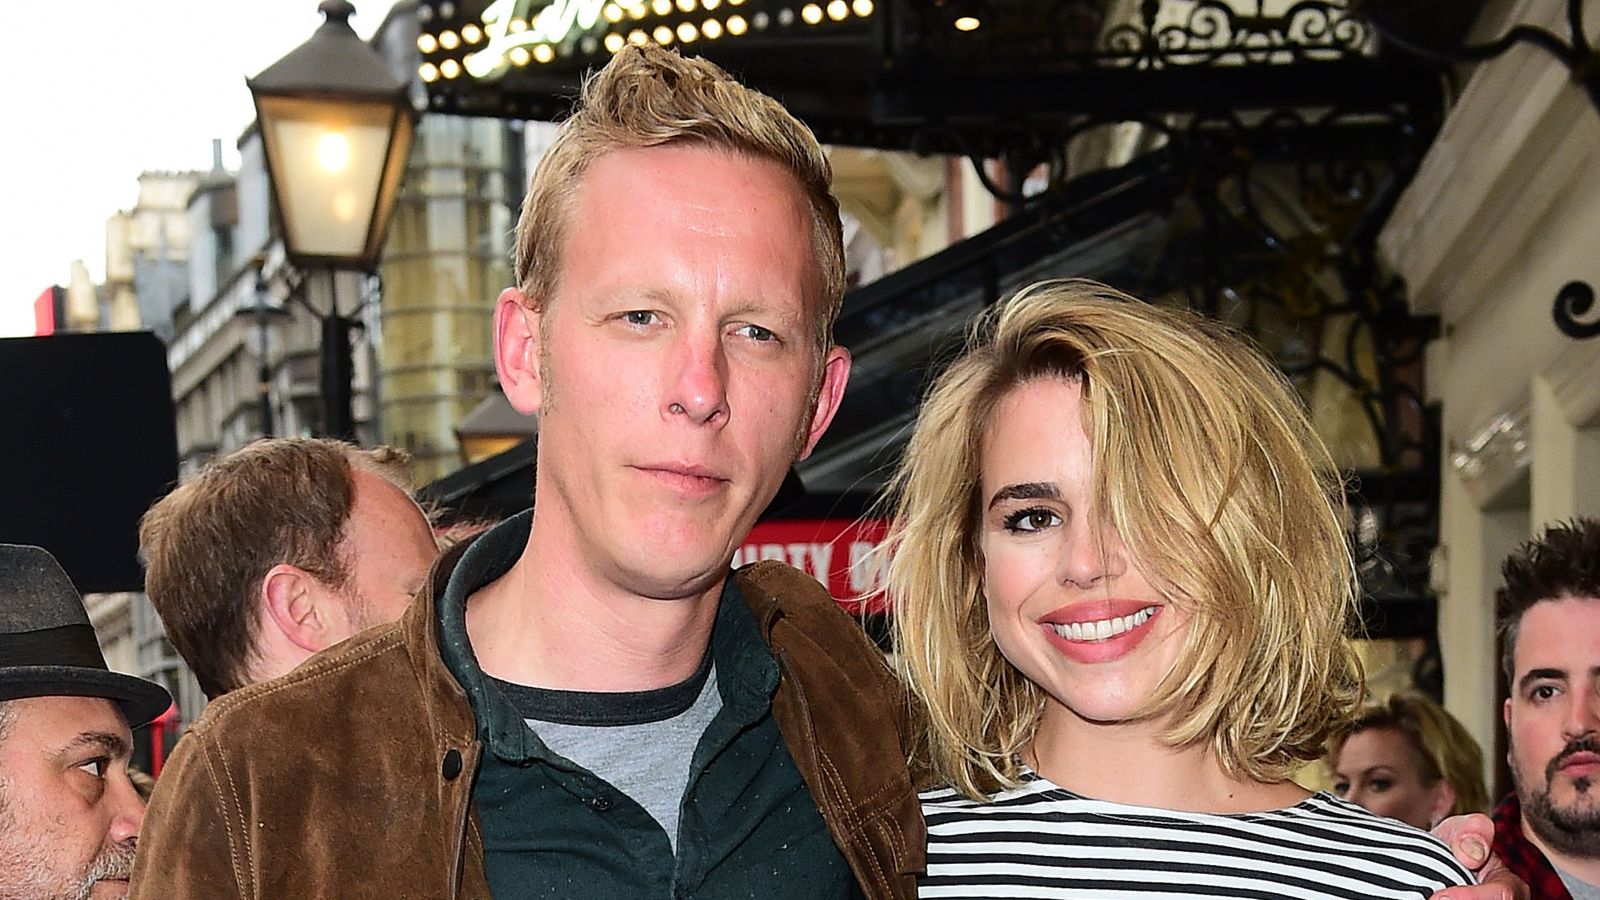 Laurence Fox responds after ex-wife Billie Piper claims 'enormous difficulty' in co-parenting with him